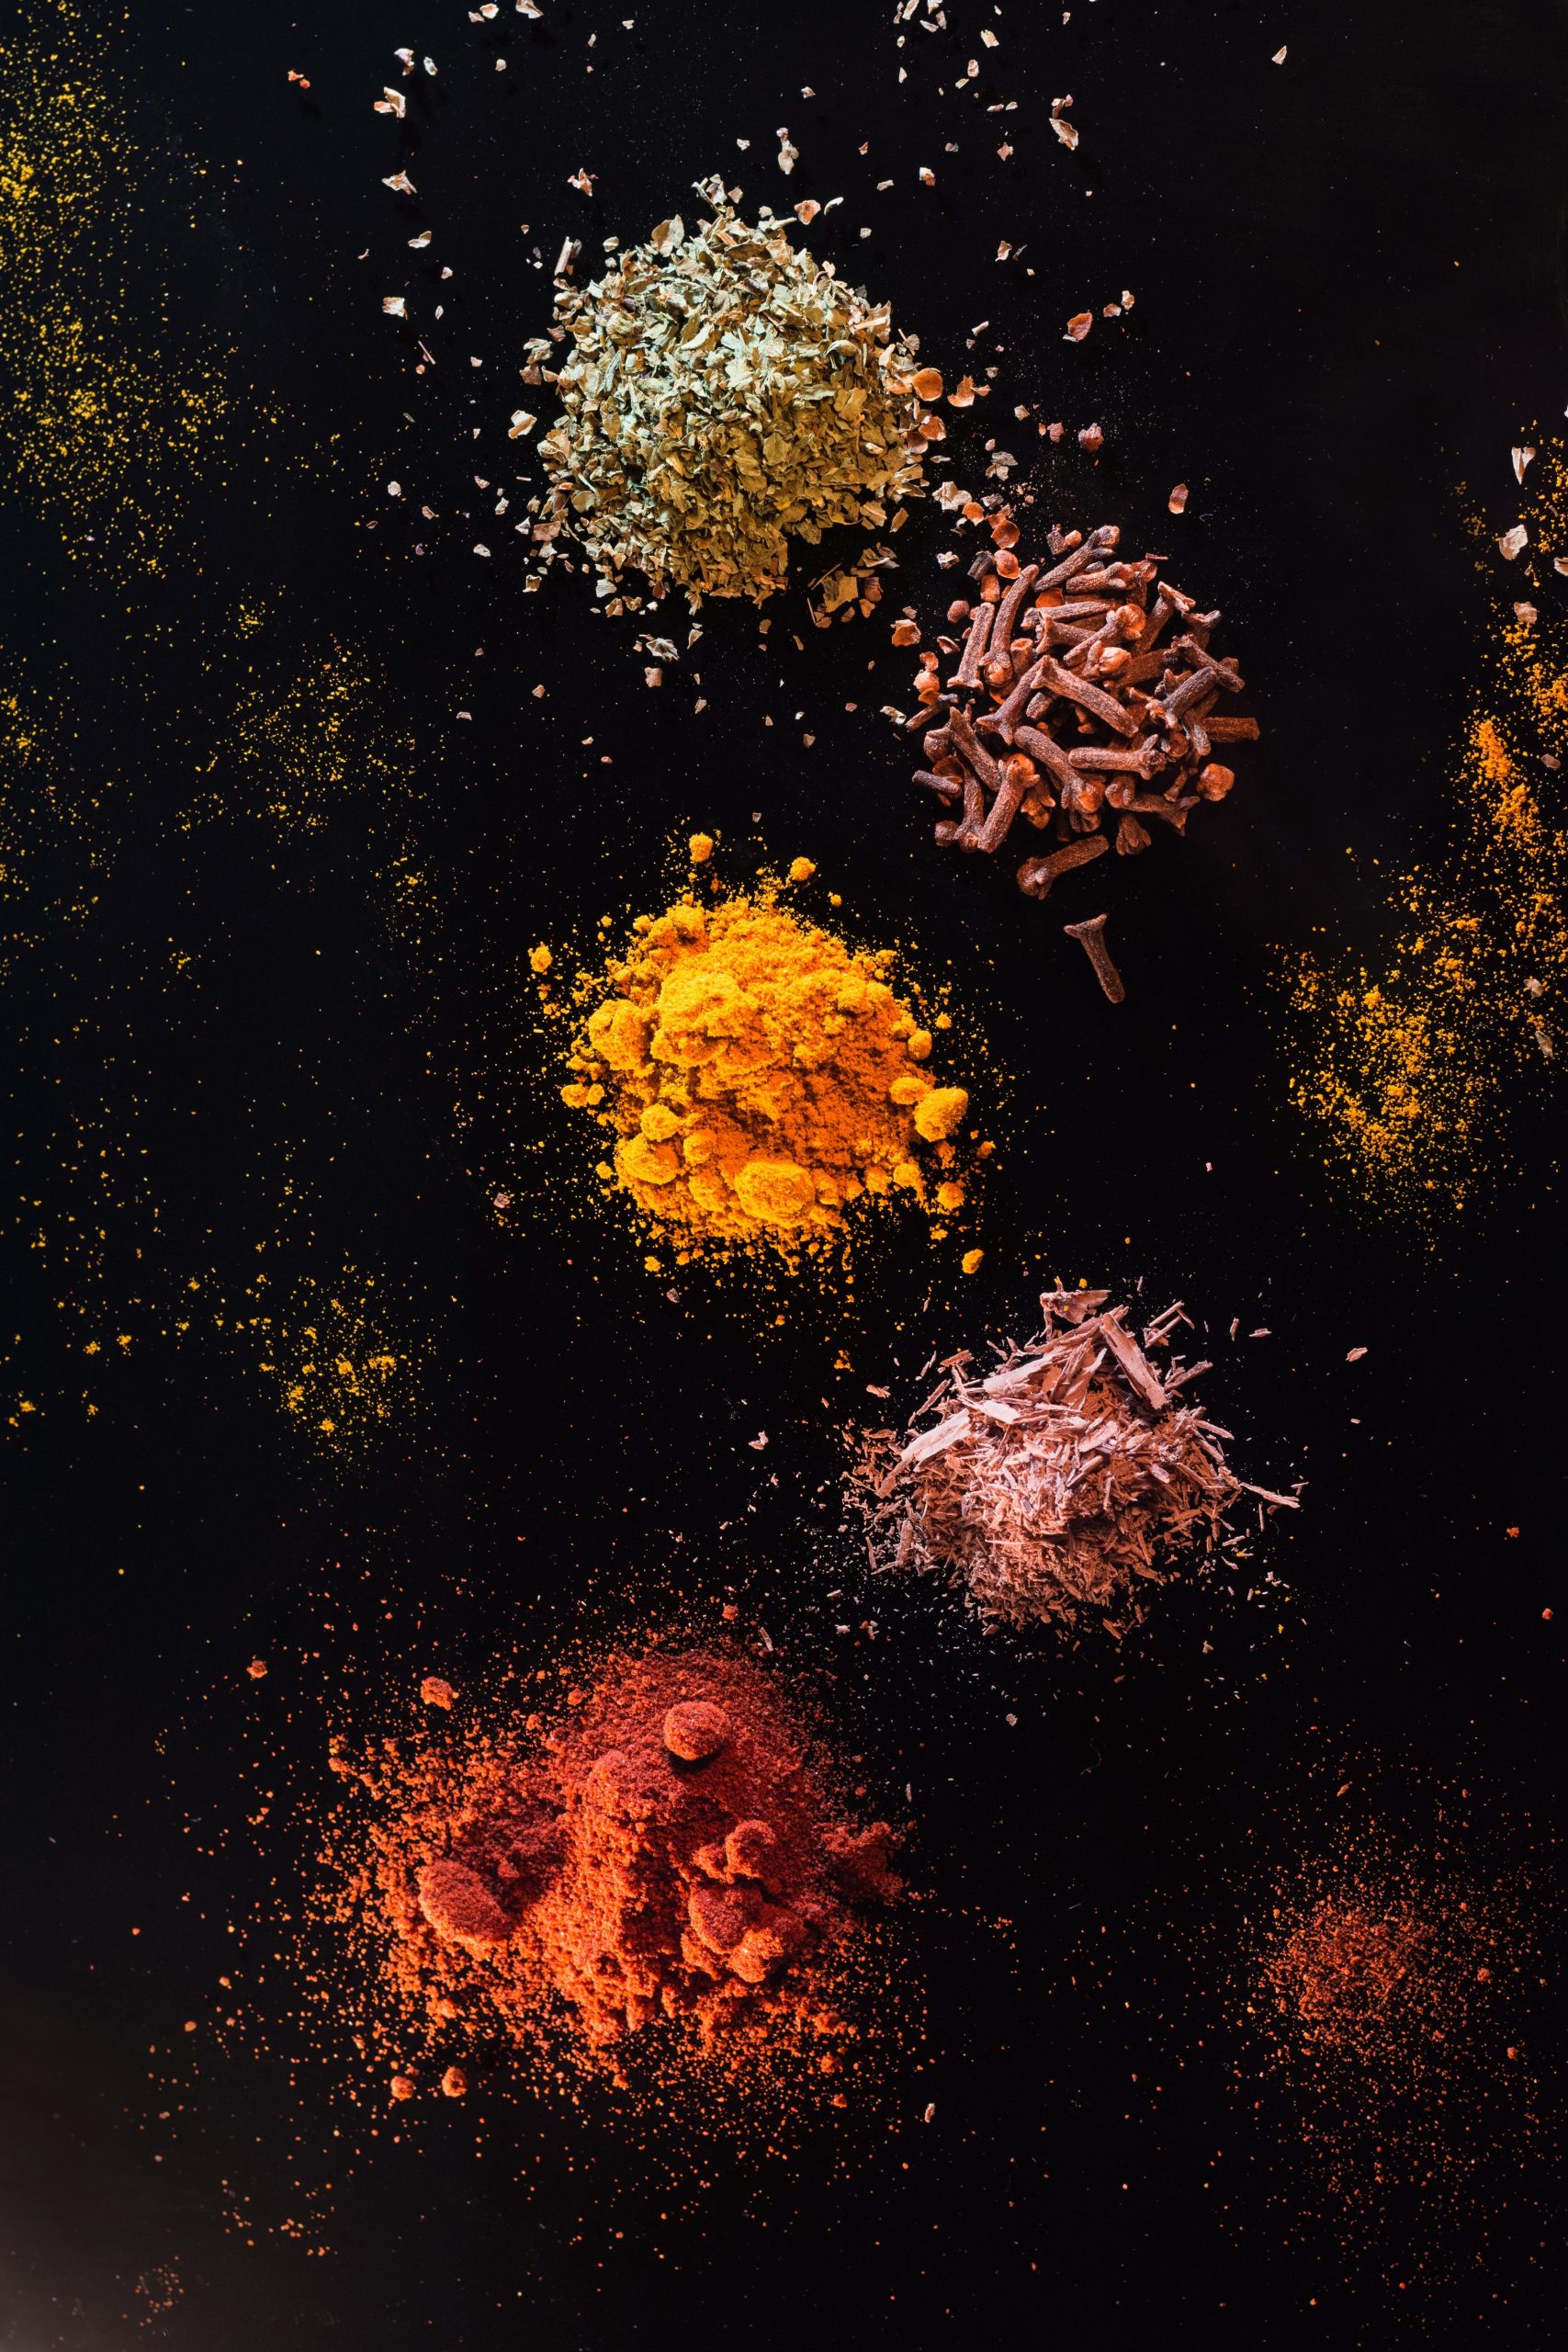 A photograph of various spices in small piles. Their colors range from deep brown to vivid yellow.